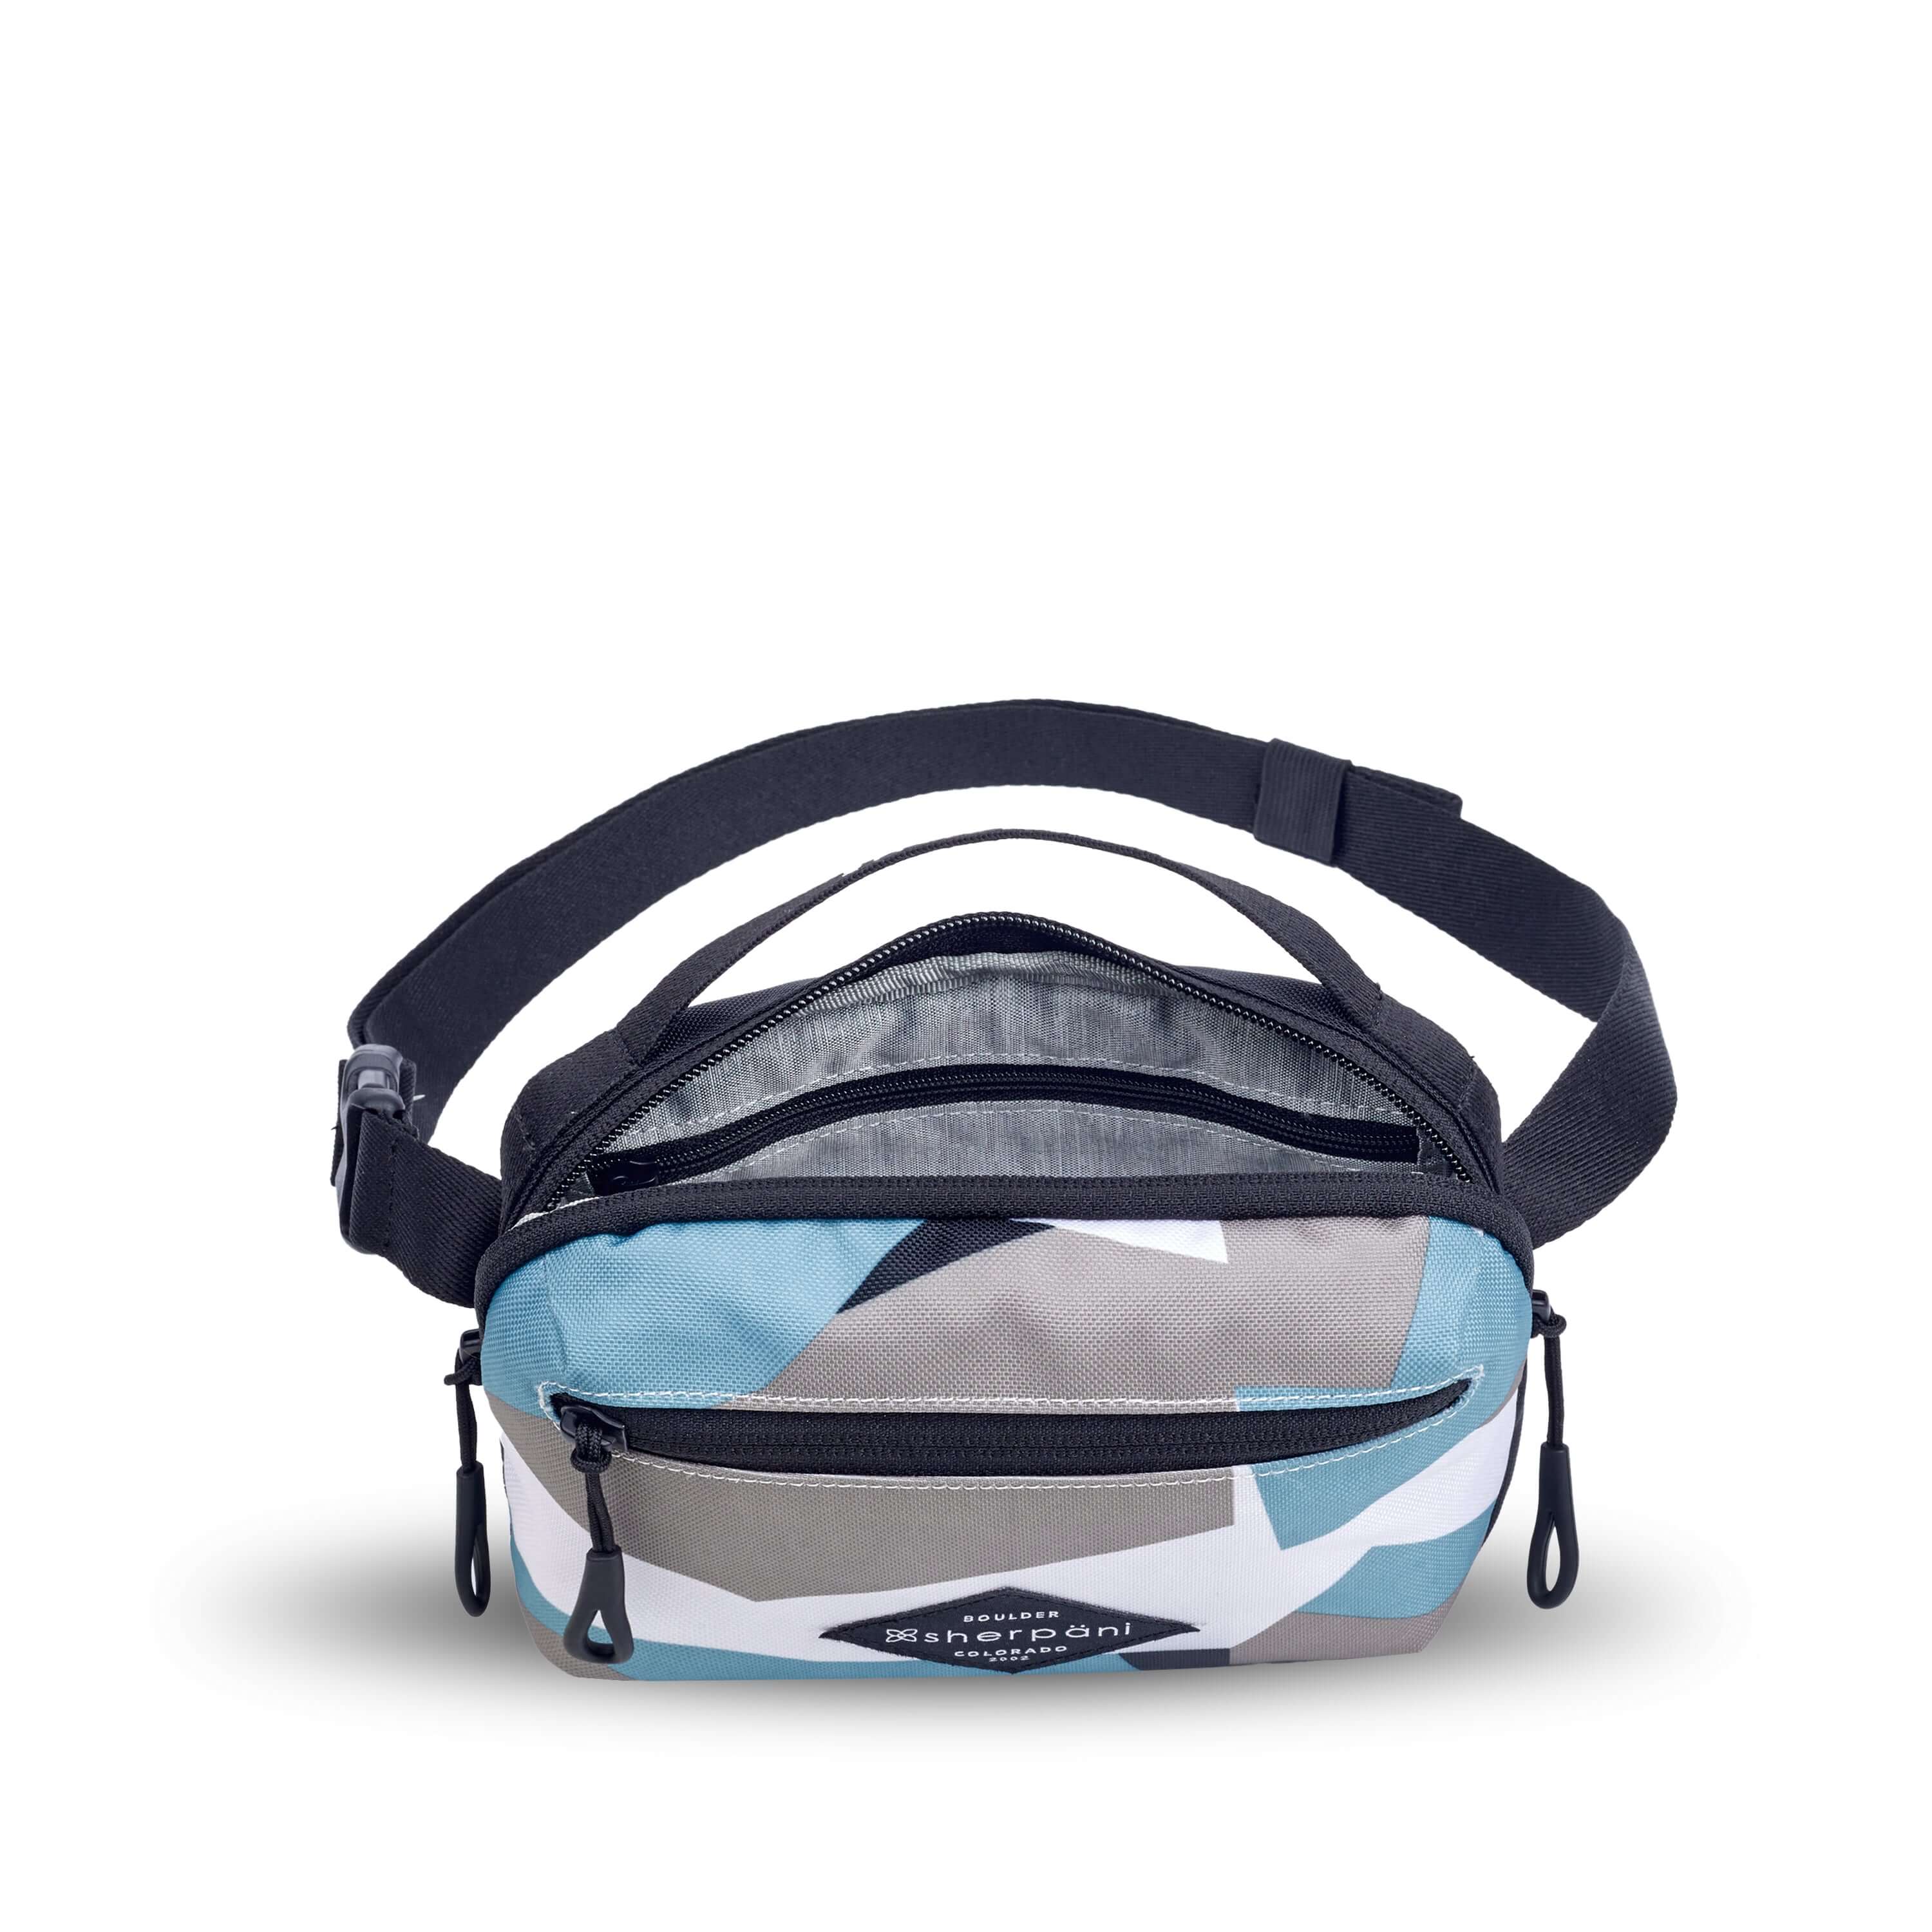 Top view of Sherpani&#39;s fanny pack, the Hyk in Summer Camo. The main zipper compartment is open to reveal a light gray interior and an internal zipper pocket.